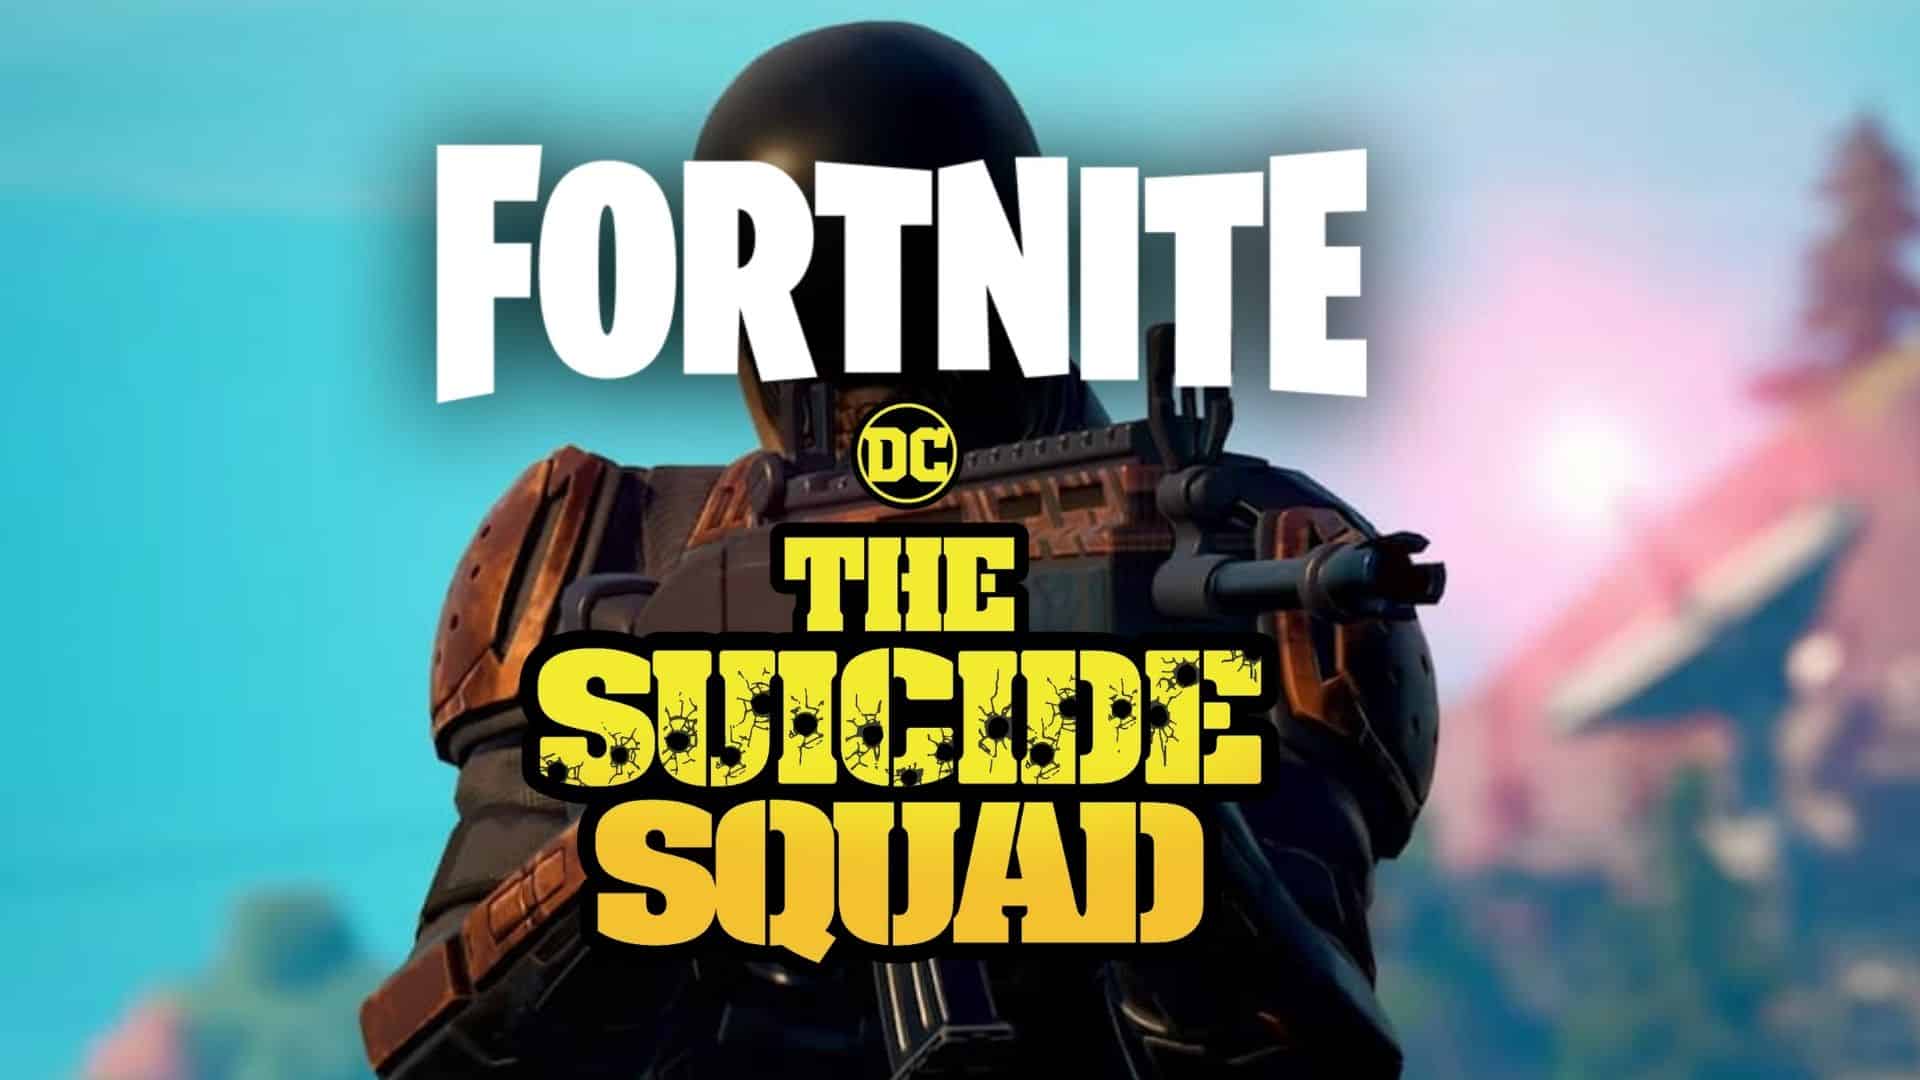 Bloodsport in Fortnite with Suicide Squad logo